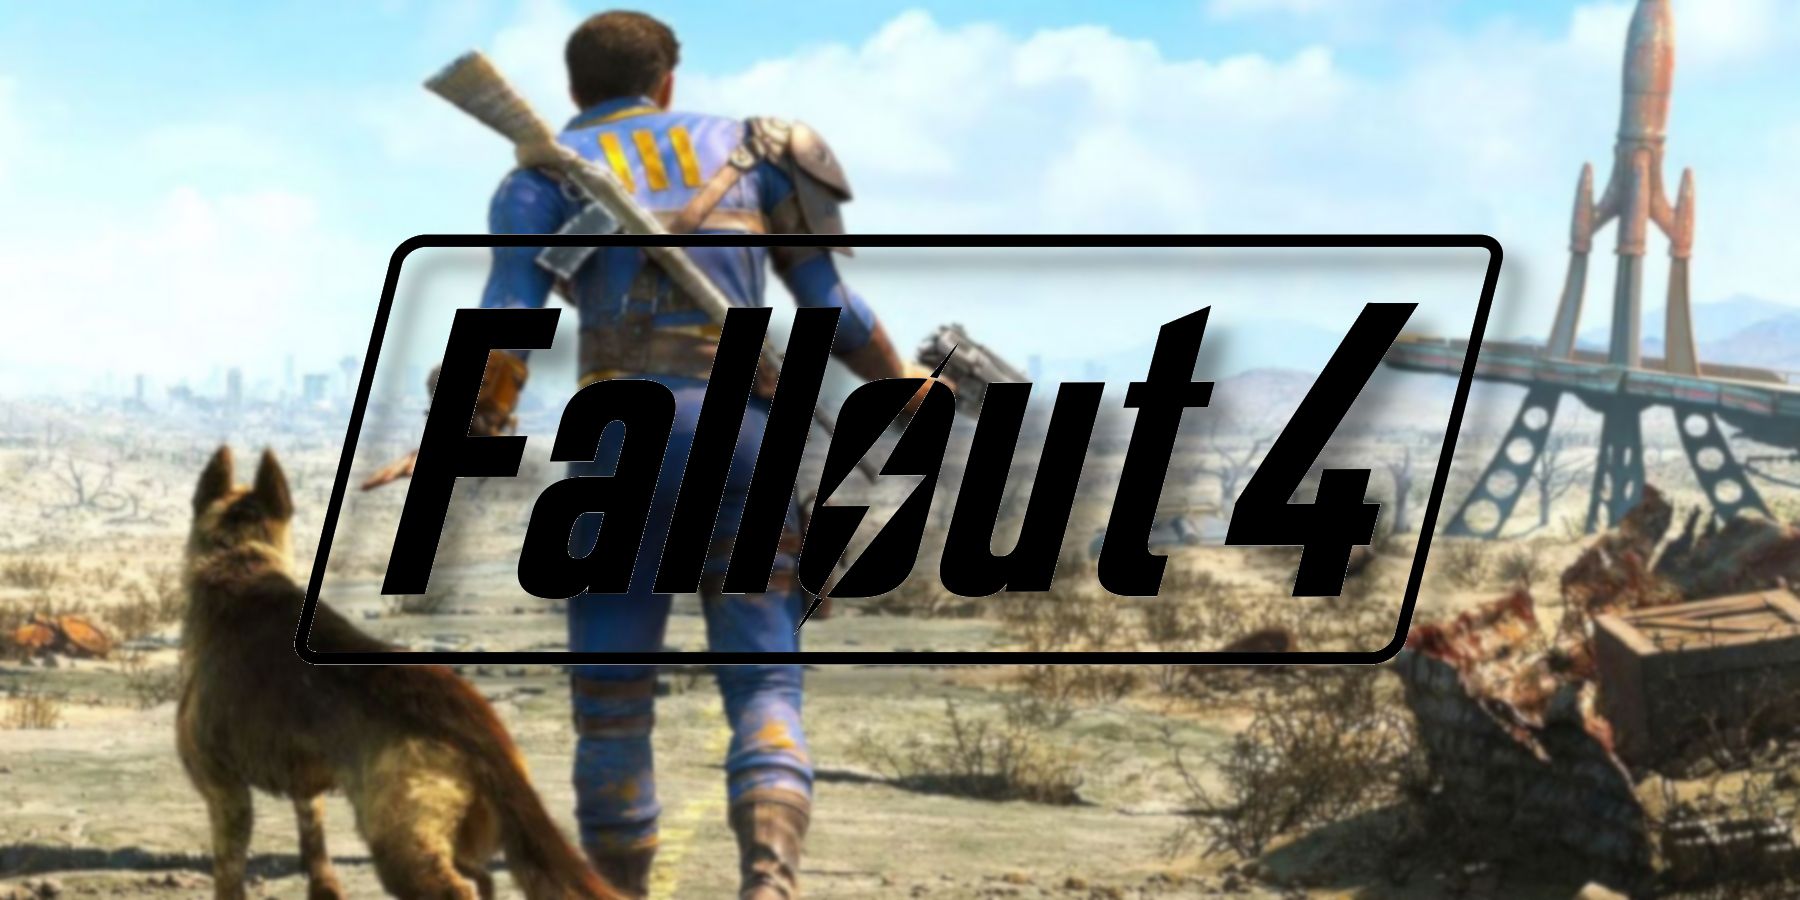 The Fallout 4 logo with the Sole Survivor and Dogmeat walking away in the background.